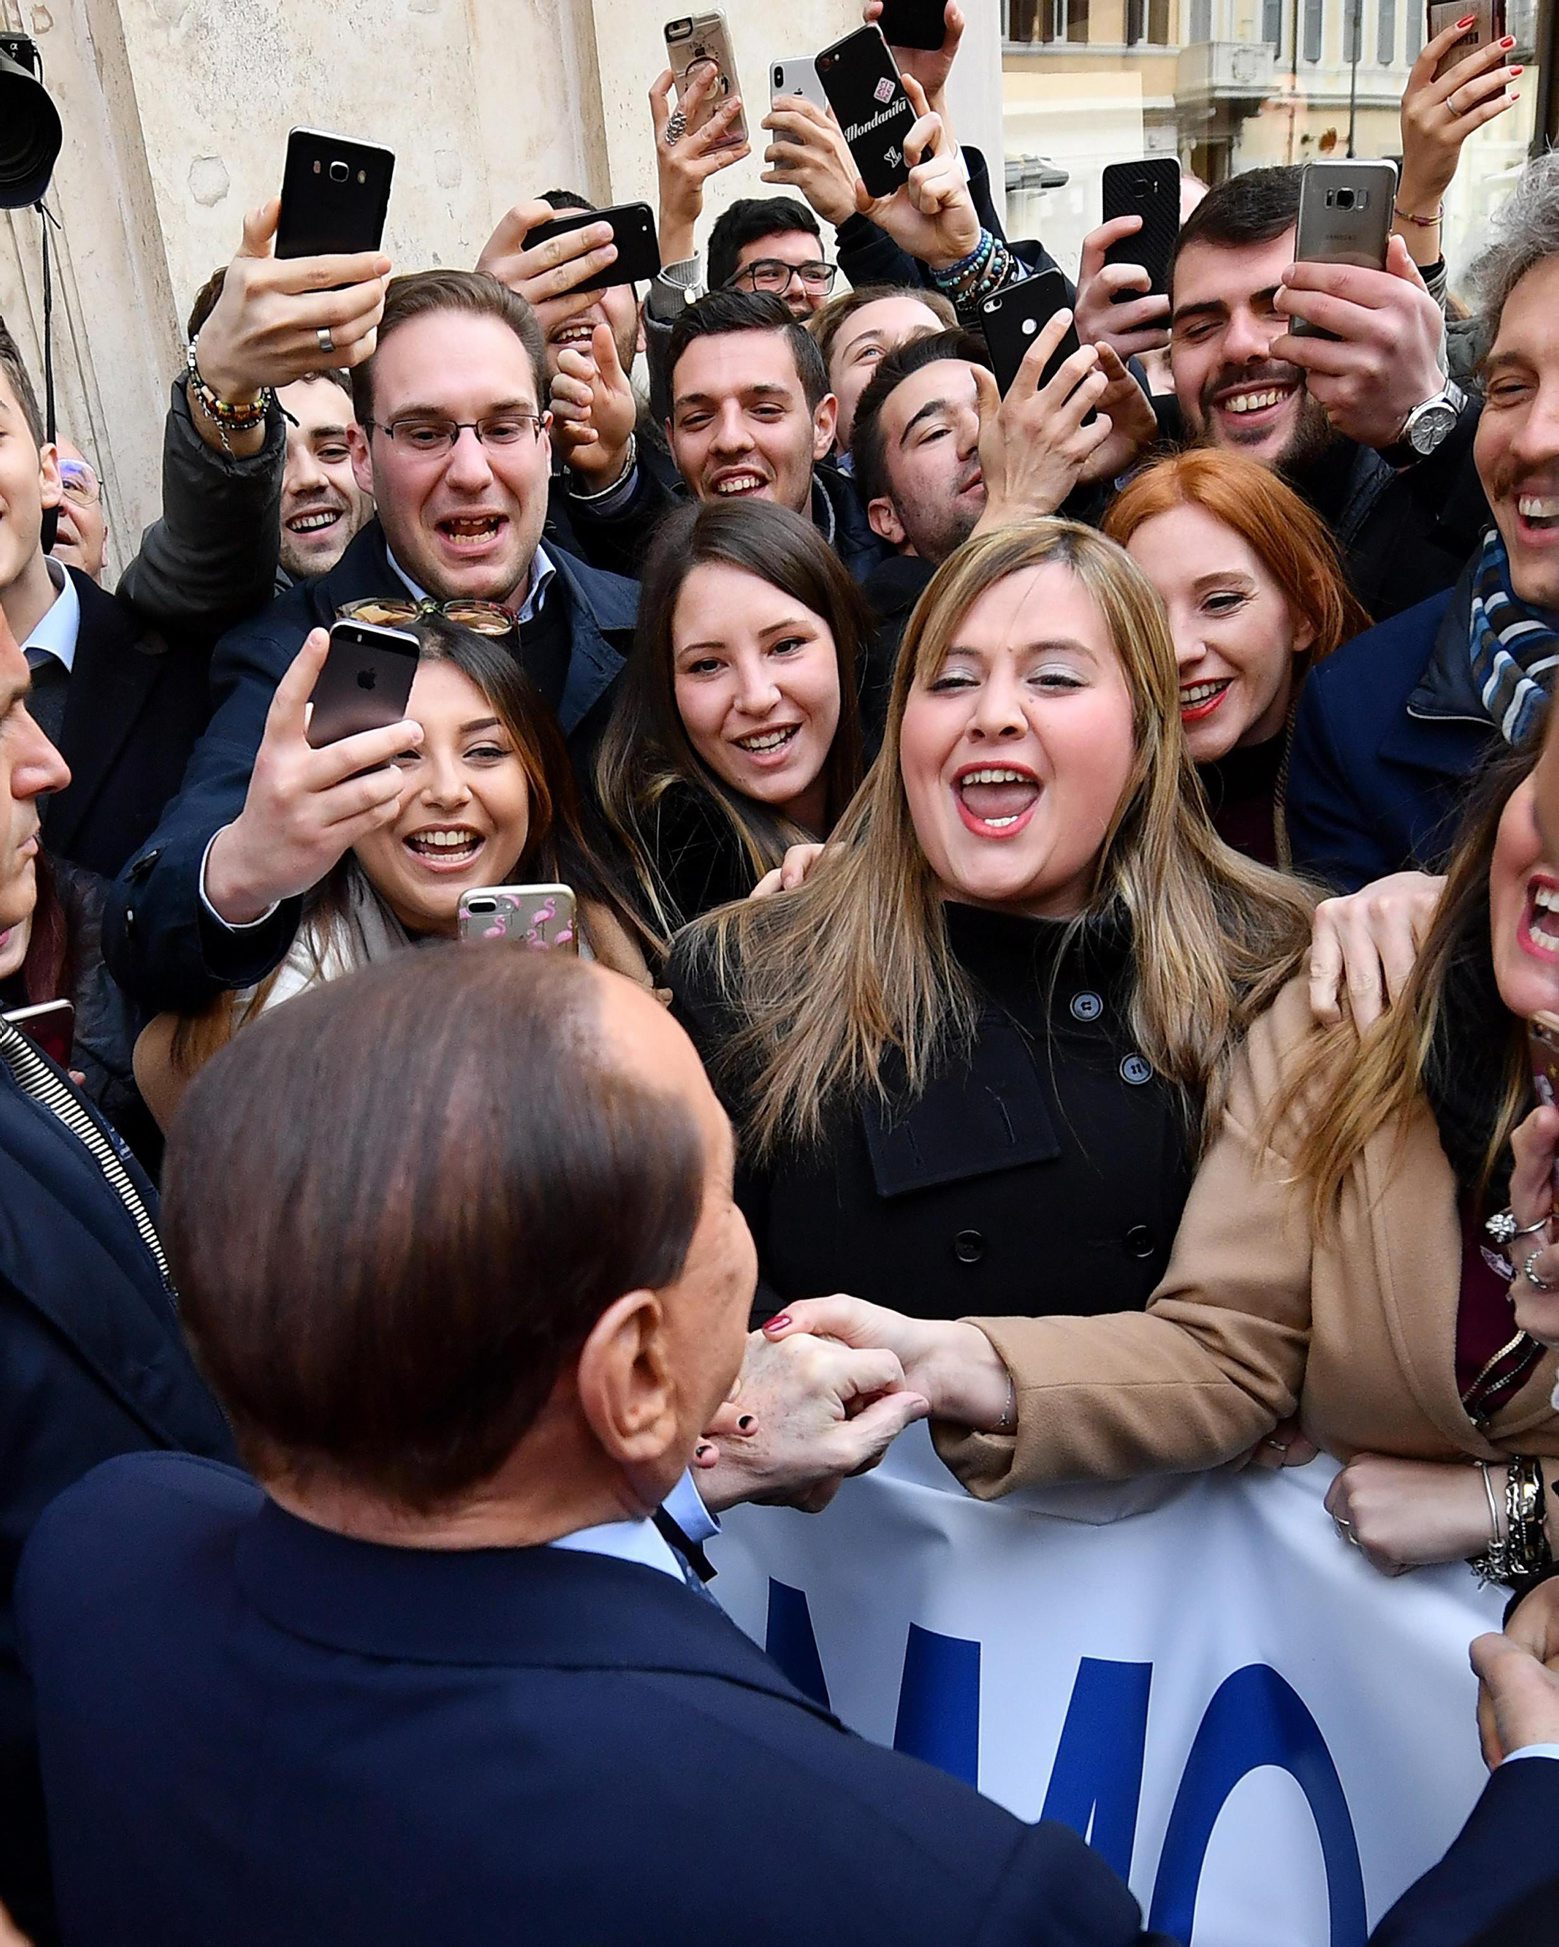 Former Italian Premier Silvio Berlusconi is cheered by followers prior to a meeting with European PeopleÄôs Party President Manfred Weber, in Rome Wednesday, Feb. 21, 2018. Berlusconi arrived on foot at a piazza in Rome where the meeting was to be held, greeted by hundreds of supporters chanting ÄúSilvio, Silvio, SilvioÄù.  He paused and explained to his fans that they need to make an X on the Forza Italia symbol on the ballot. (Ettore Ferrari/ANSA via AP) Italy Berlusconi